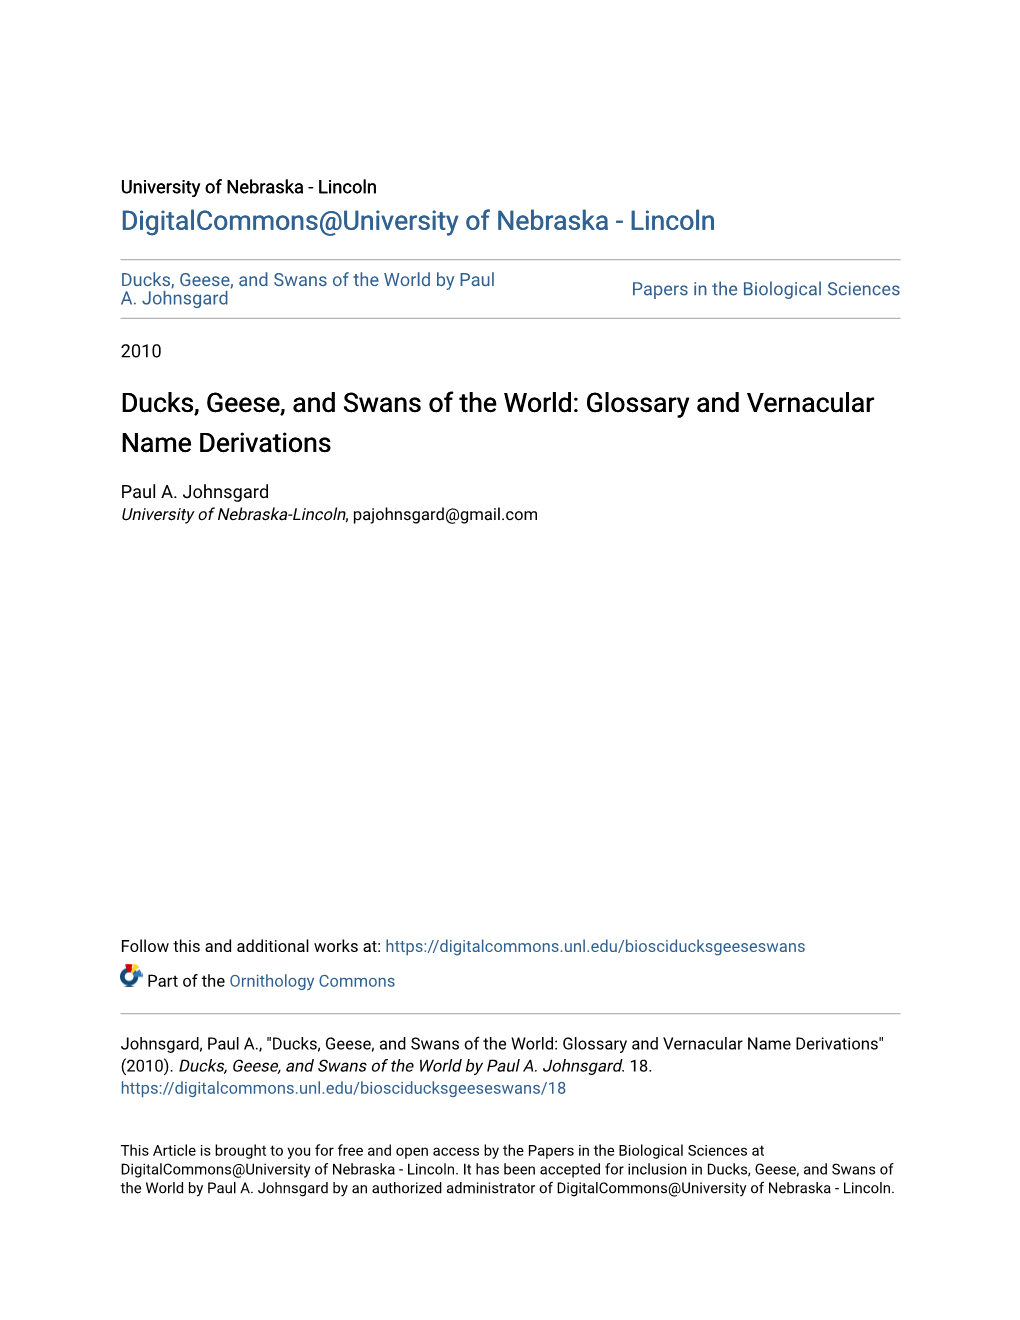 Ducks, Geese, and Swans of the World: Glossary and Vernacular Name Derivations